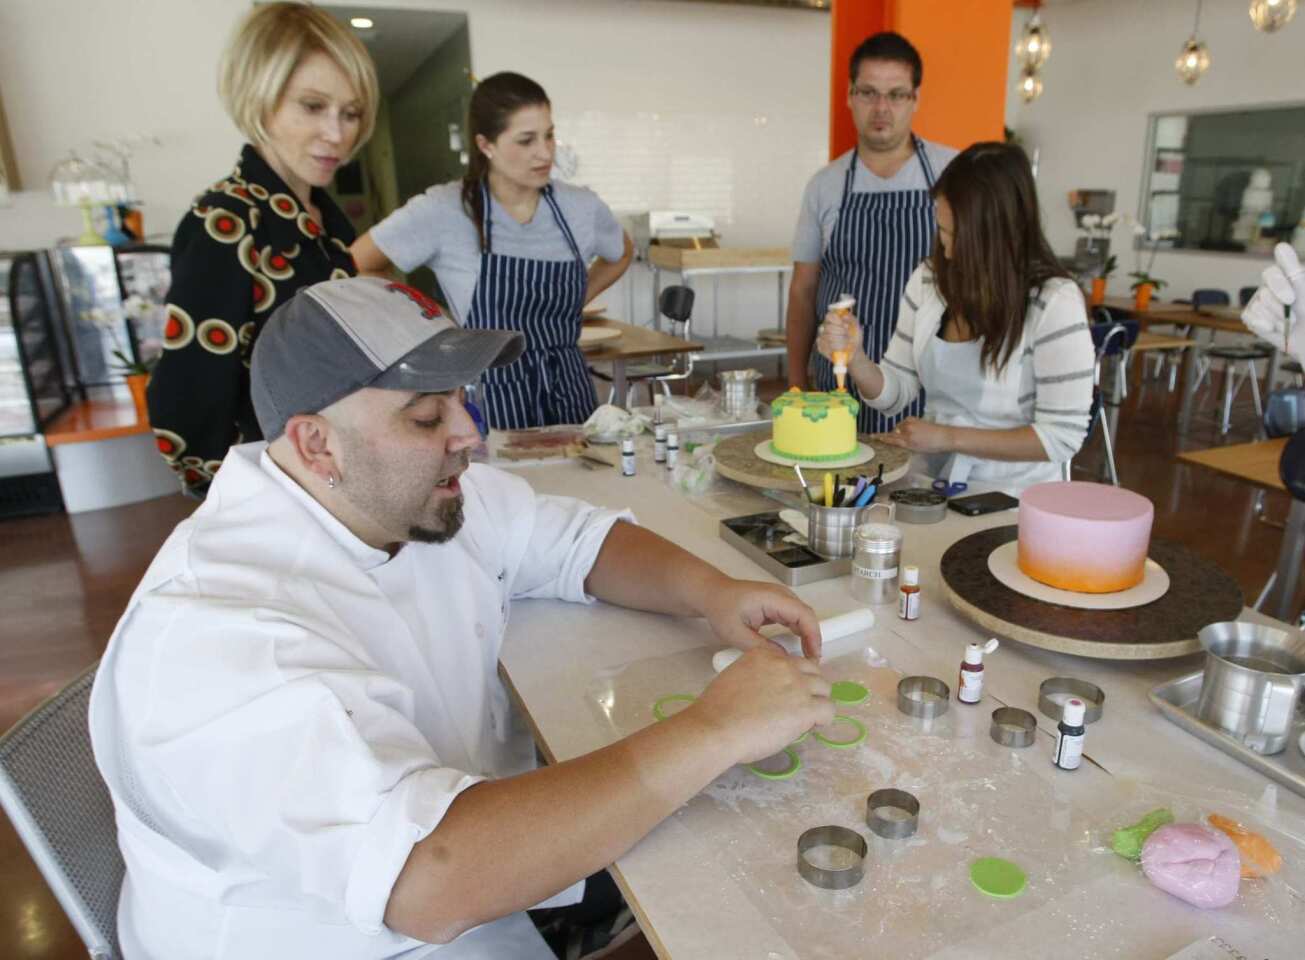 Celebrity baker Duff Goldman's Cakemix is a hands-on retail component next to his Charm City Cakes West on Melrose Avenue in L.A. Customers can design and decorate their own cakes. Here, Goldman shows how to make shapes from colored fondant.